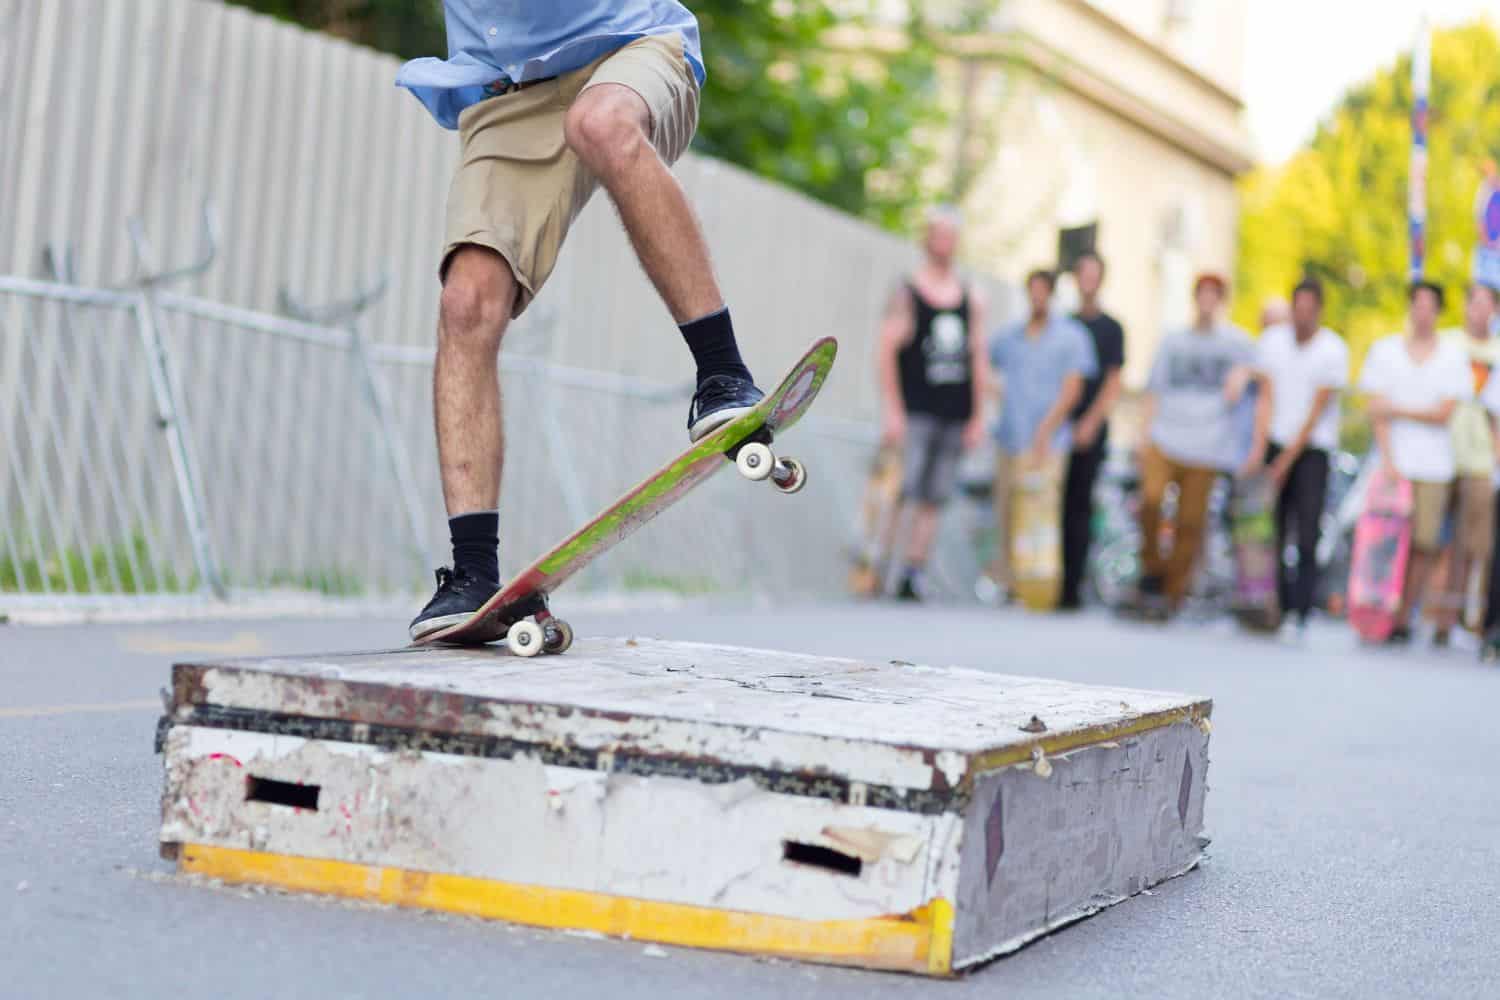 practice skateboard at a achedule to conquer fear of skateboarding